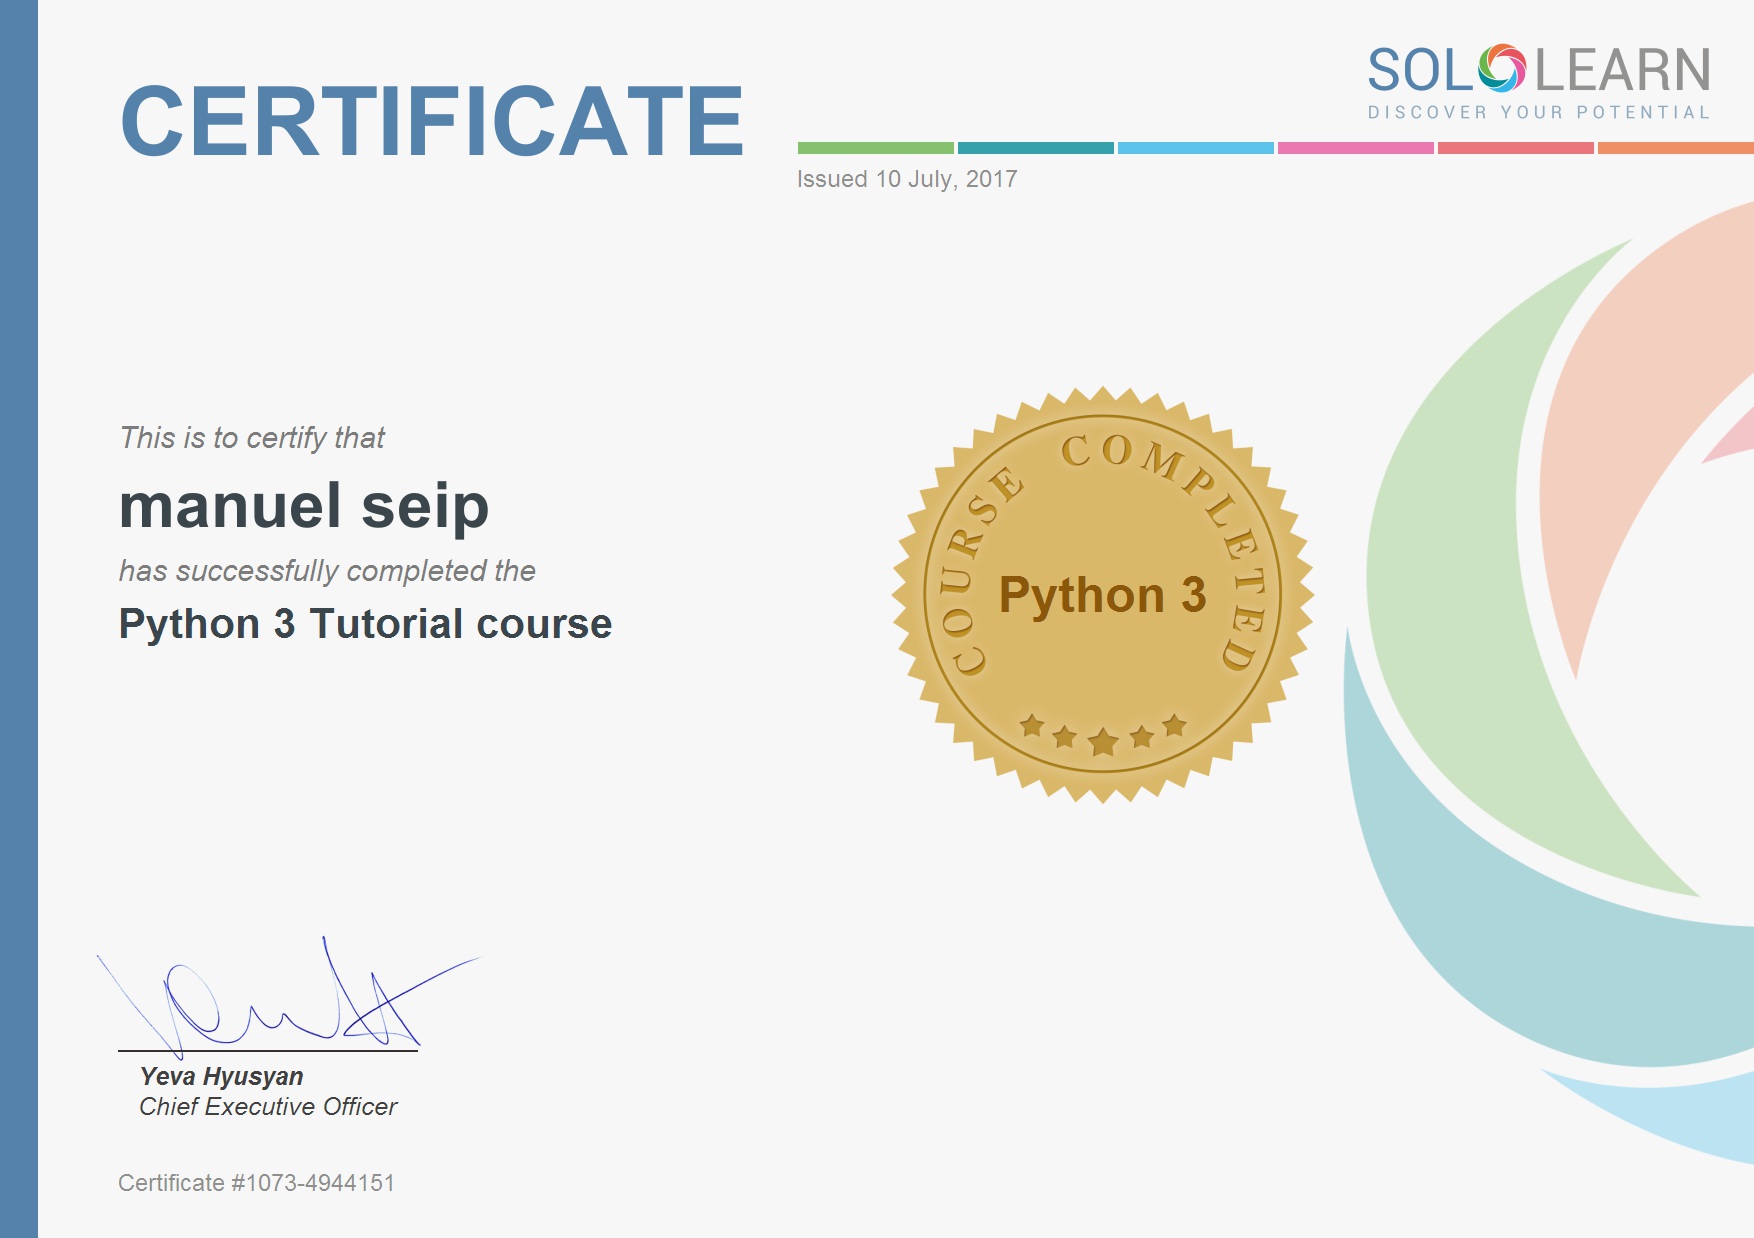 Python 3 Tutorial Course Certificate from SoloLearn